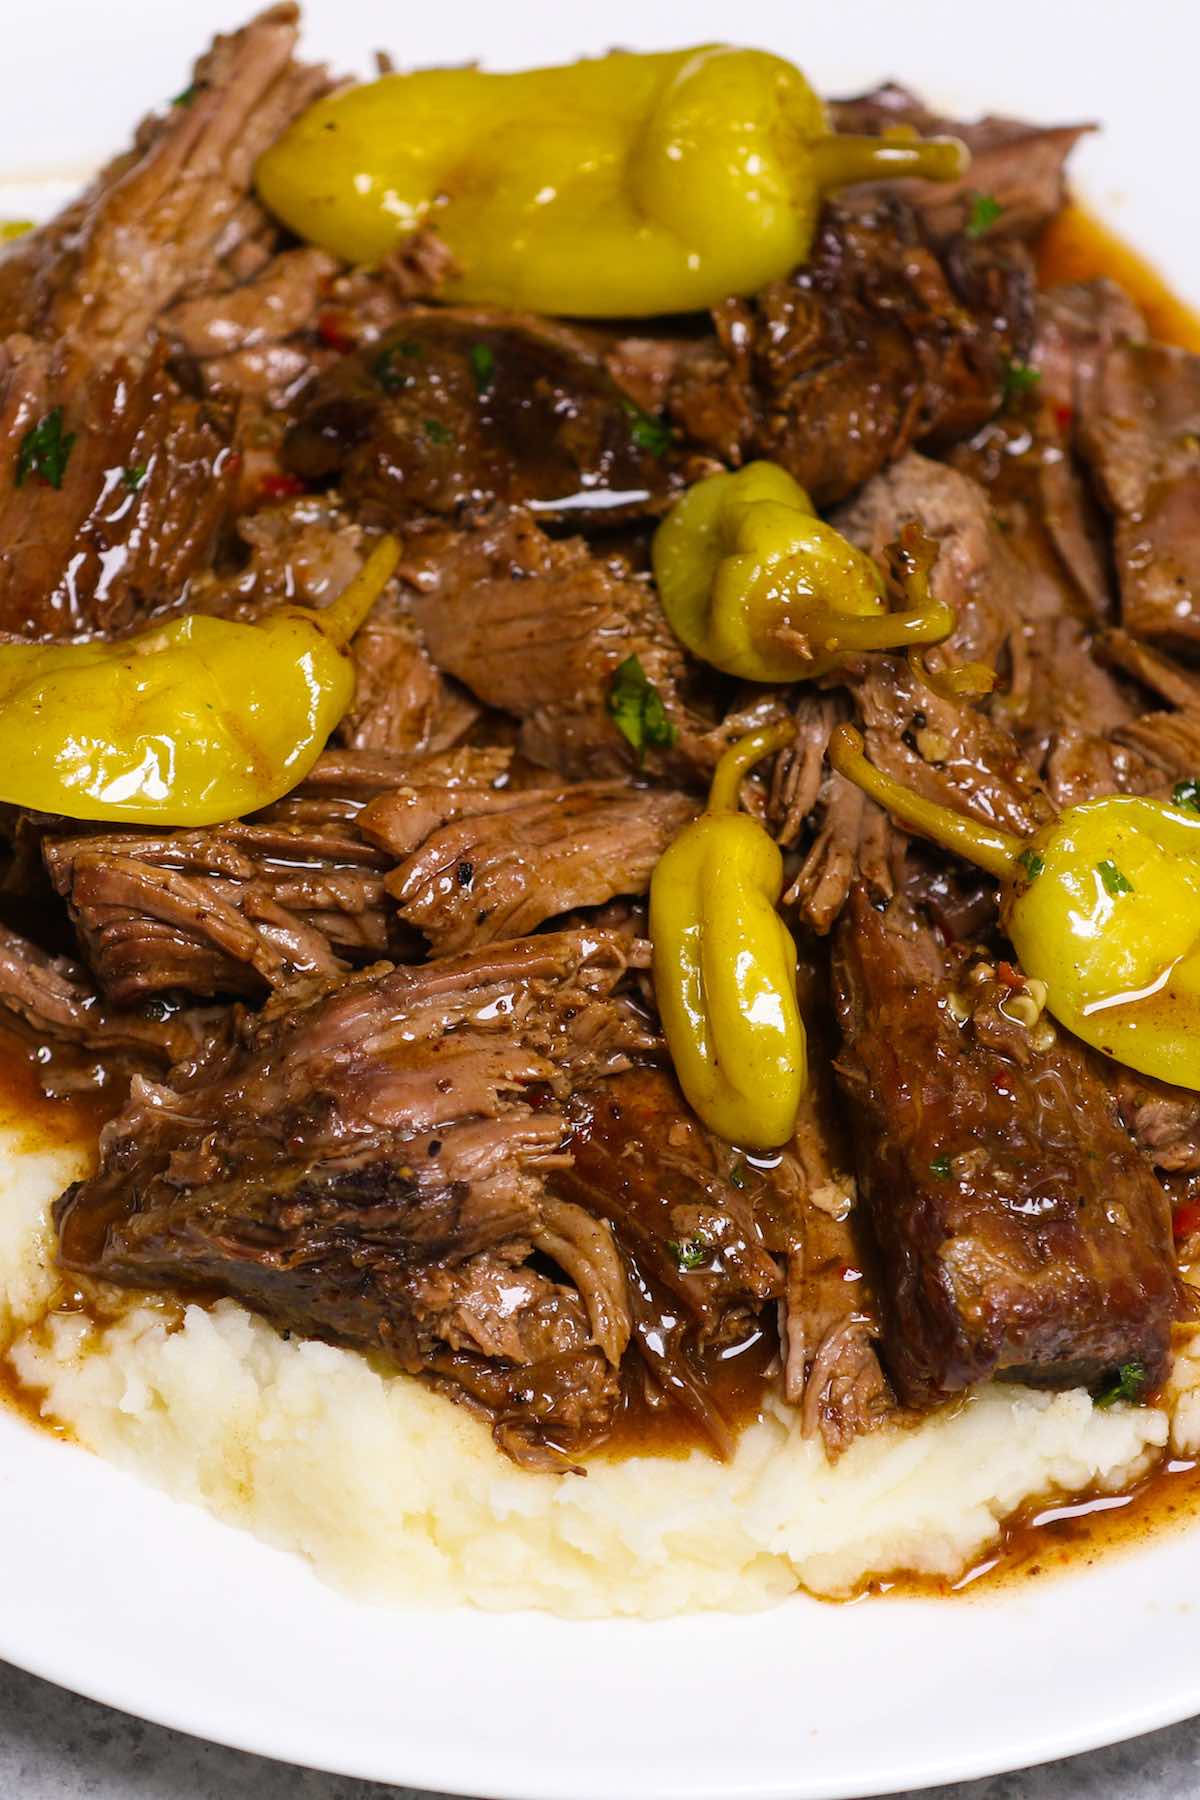 Instant Pot Mississippi Pot Roast is an easy and comforting dinner recipe that even picky eaters will devour. The chuck roast is fall-apart tender with a flavorful gravy. It’s made right in your pressure cooker and is so much faster than any other method! 